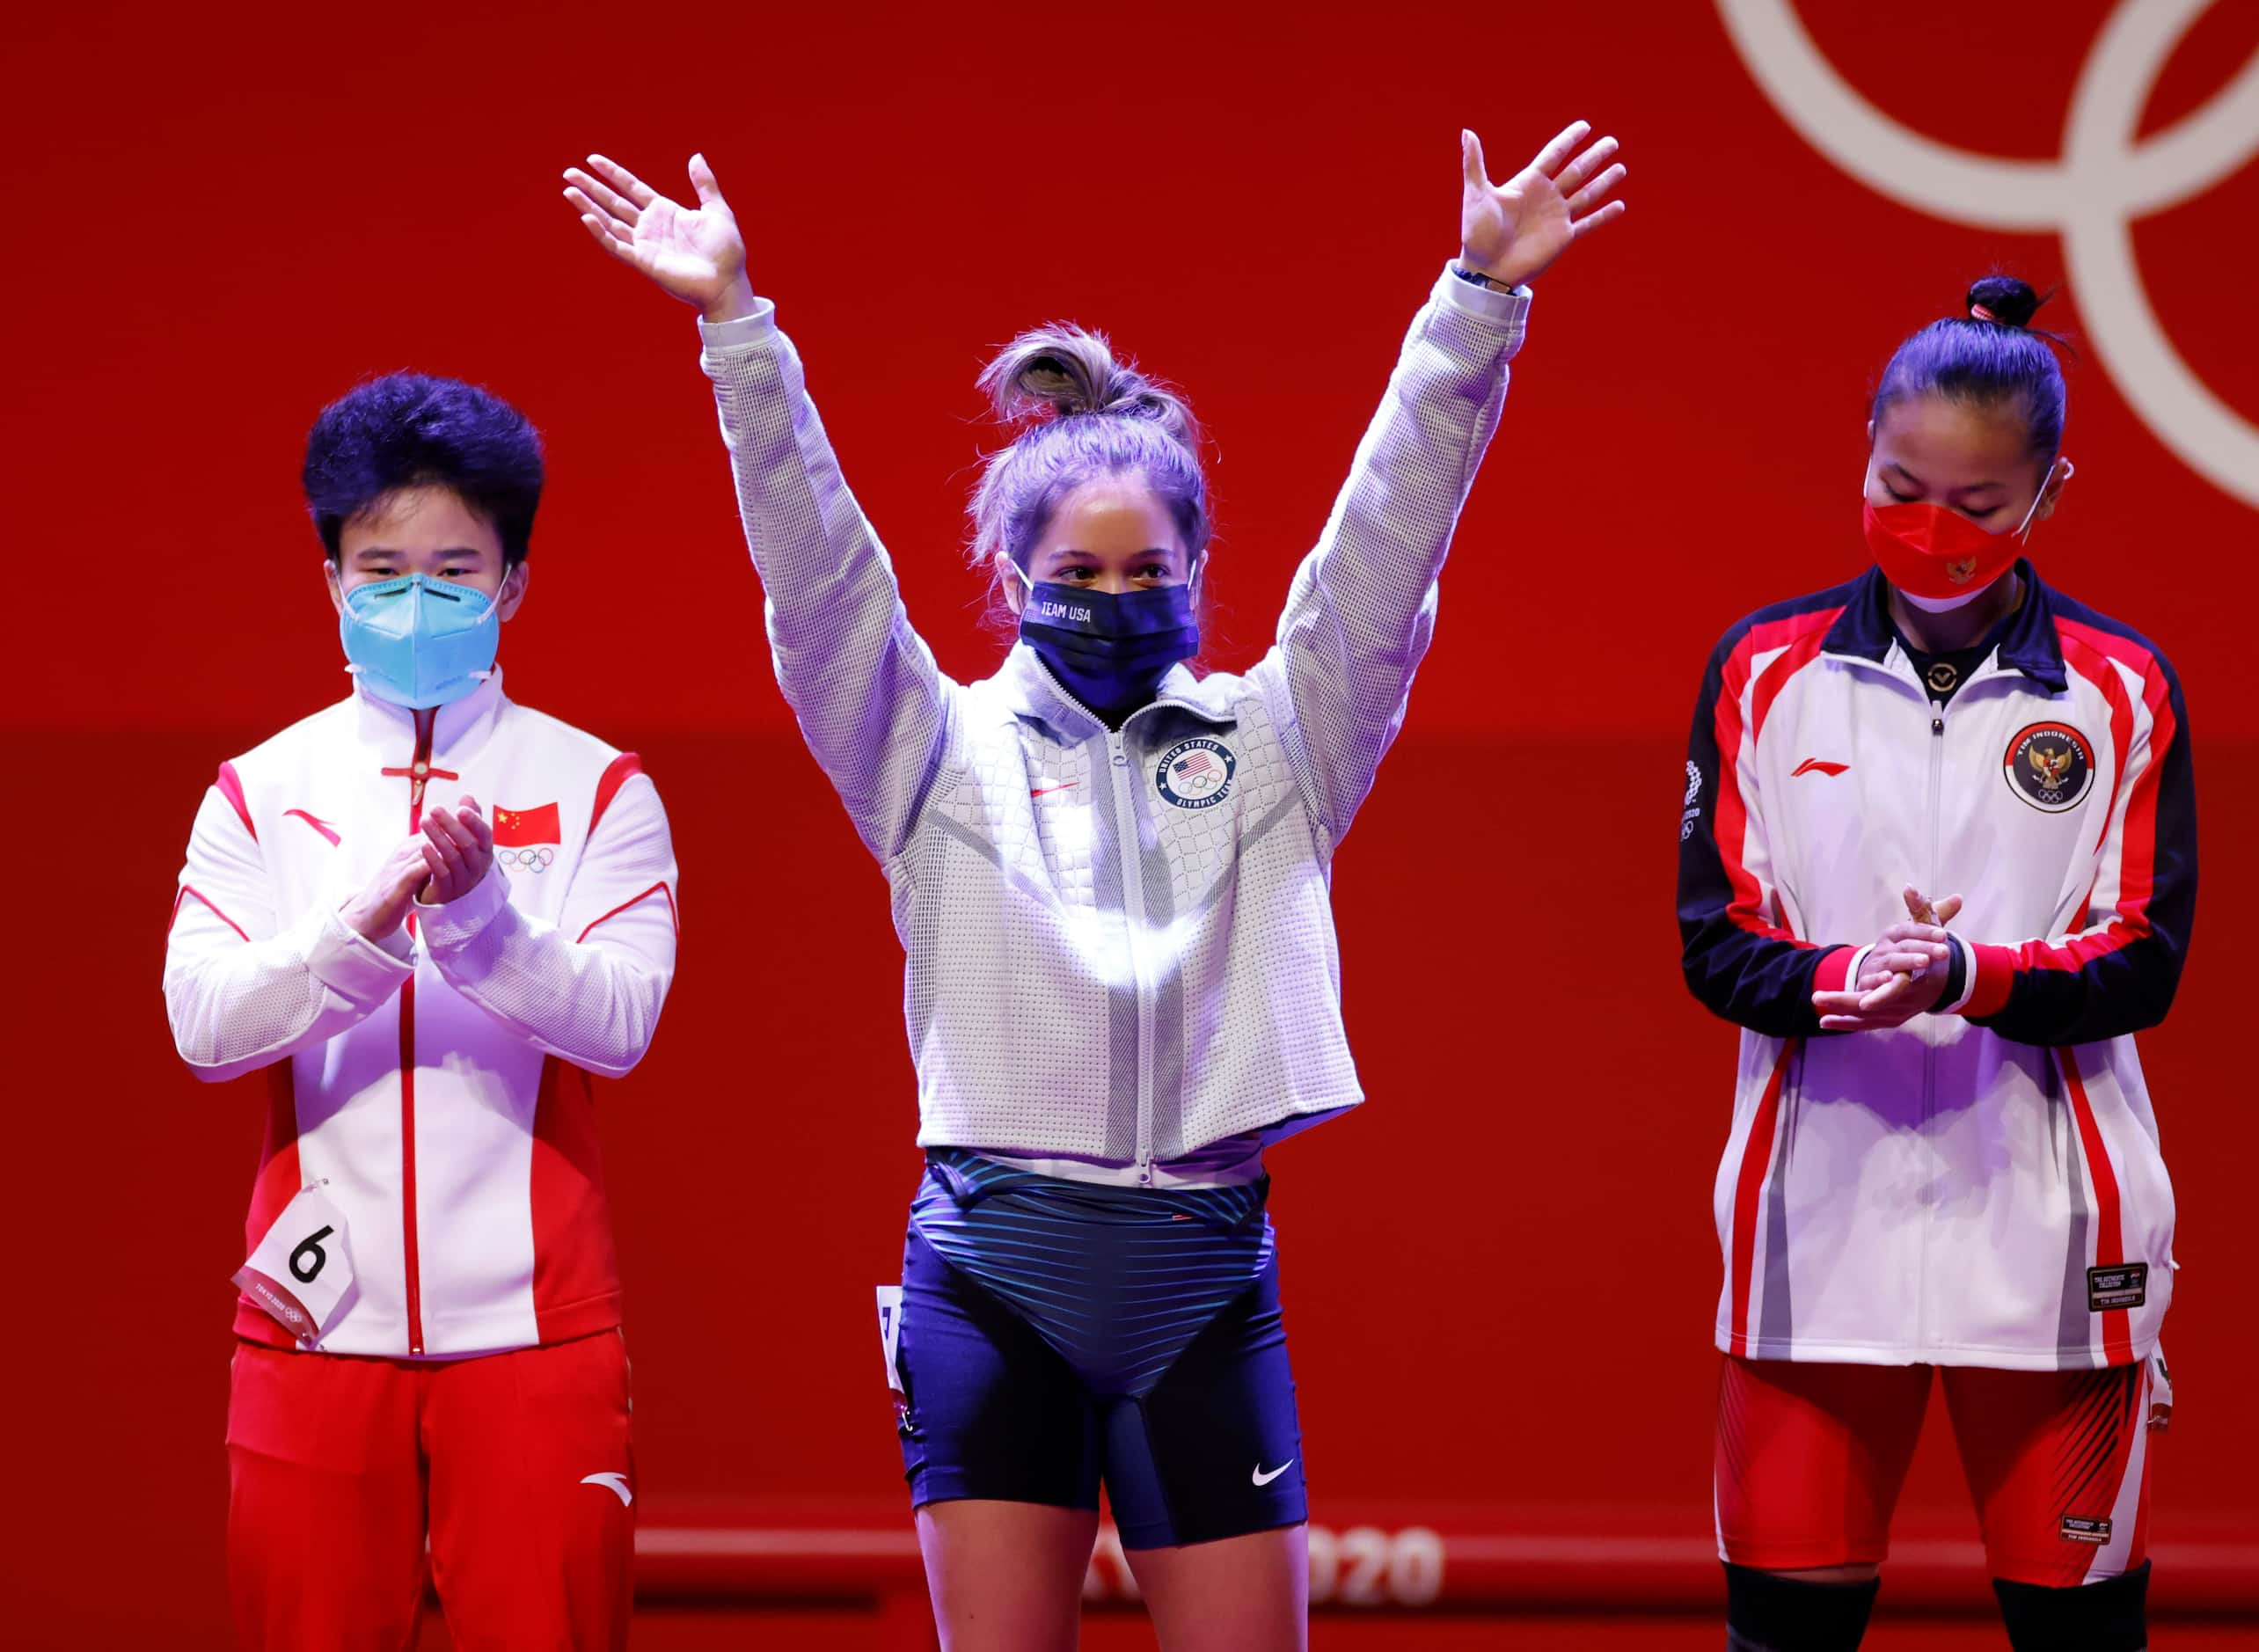 USA’s Jourdan Delacruz waves as she is introduced during the women’s 49 kg weightlifting...